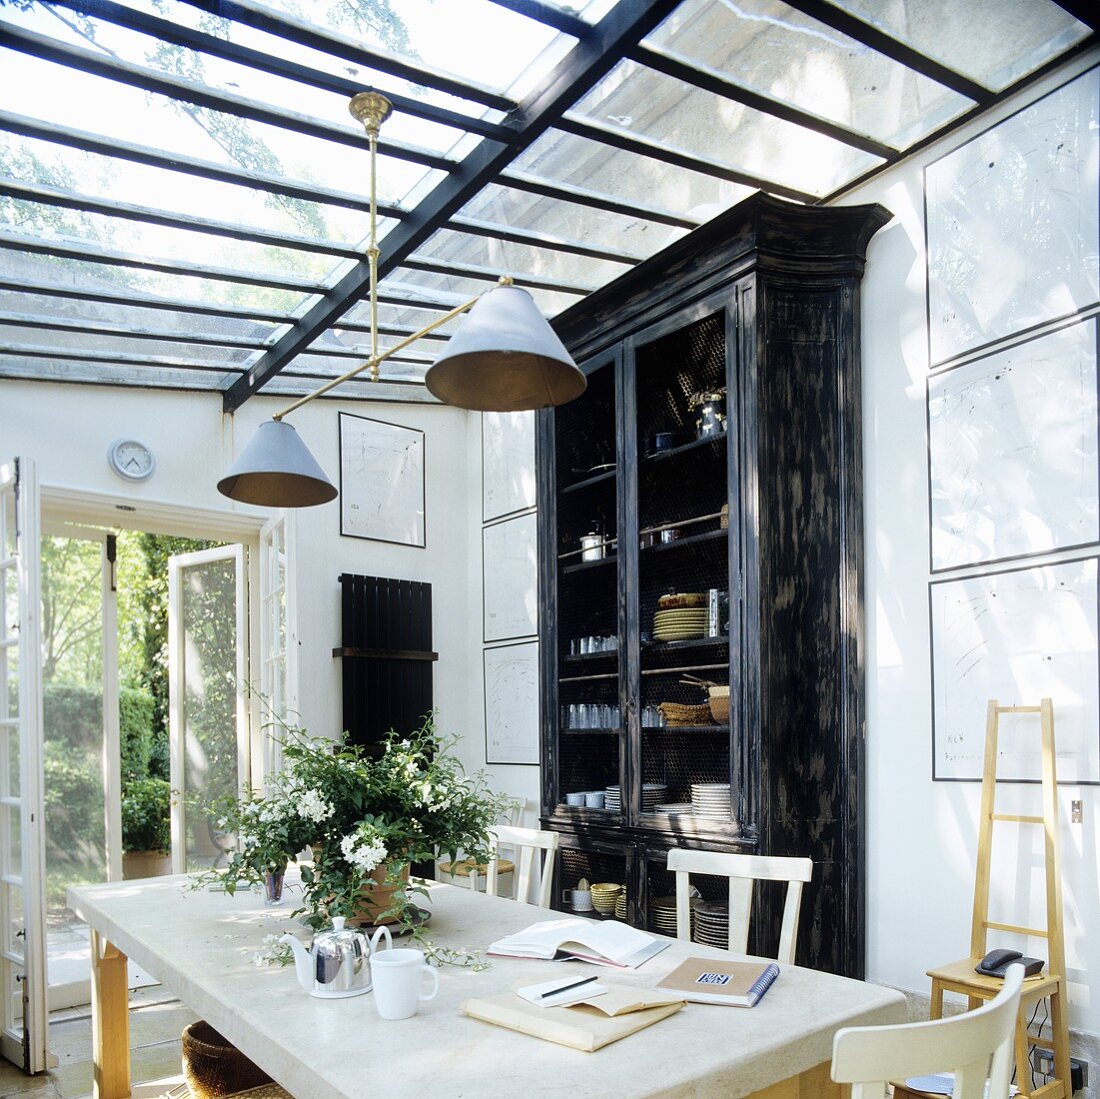 A dining room and a high black crockery cupboard in a glass extension with a door into the garden